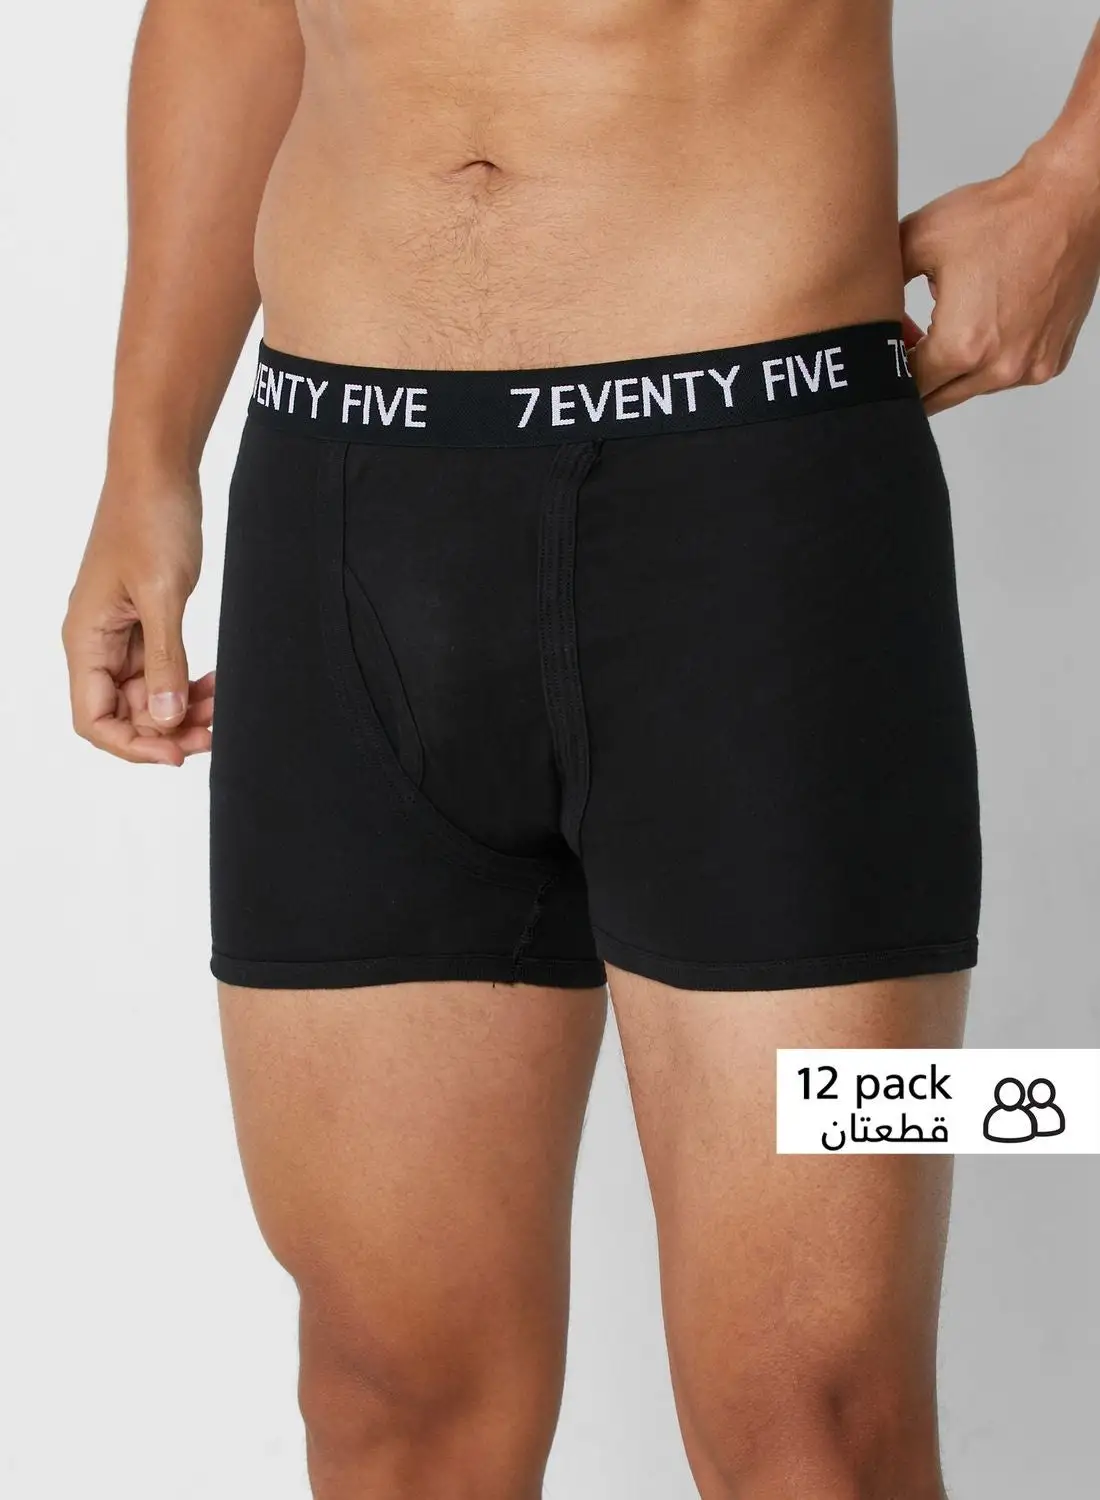 Seventy Five Basics 12 Pack Waist Band Trunks With Antibacterial Finish